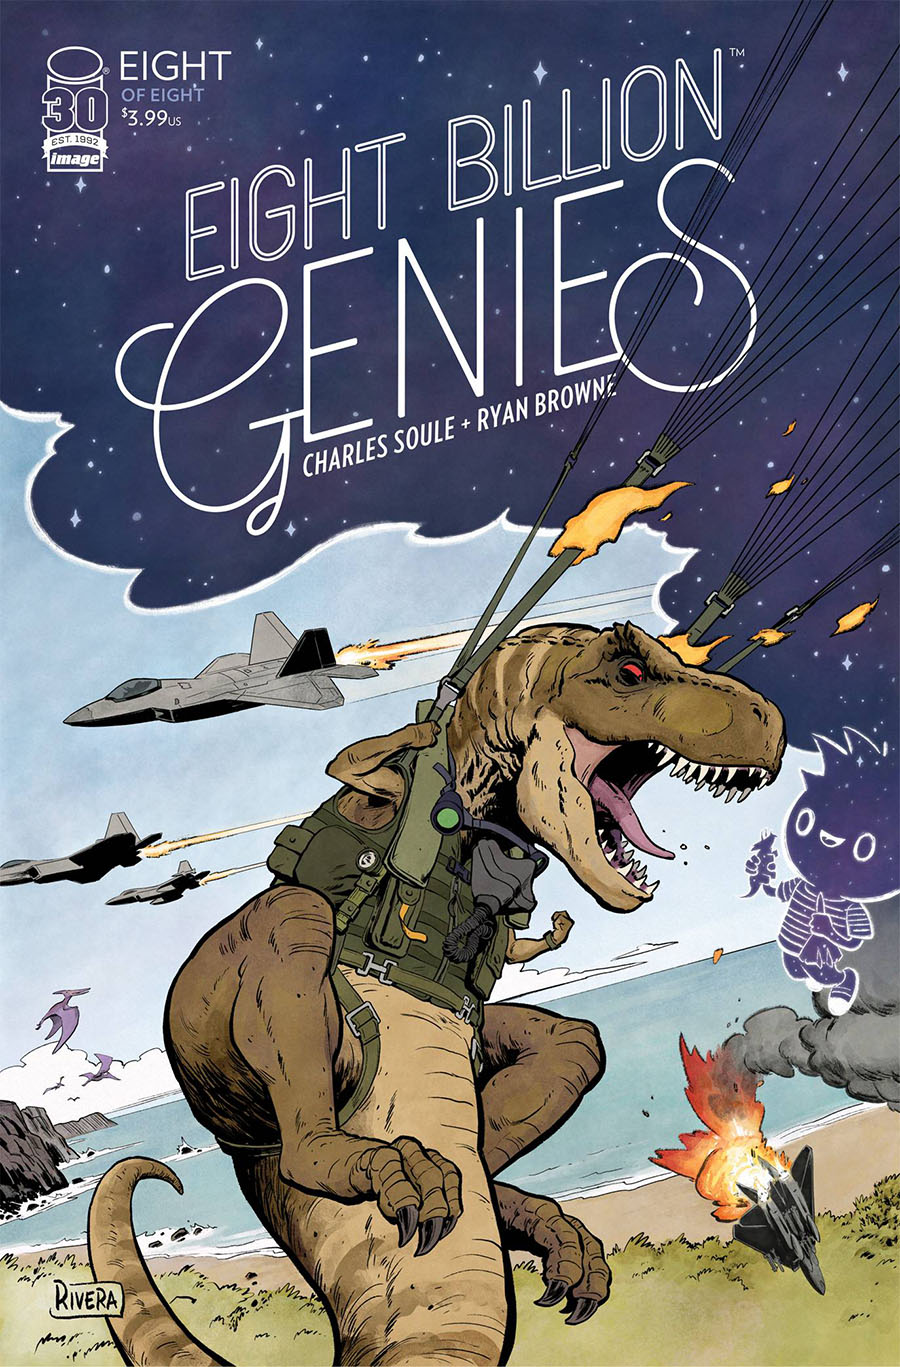 Eight Billion Genies #8 Cover B Variant Paolo Rivera Cover